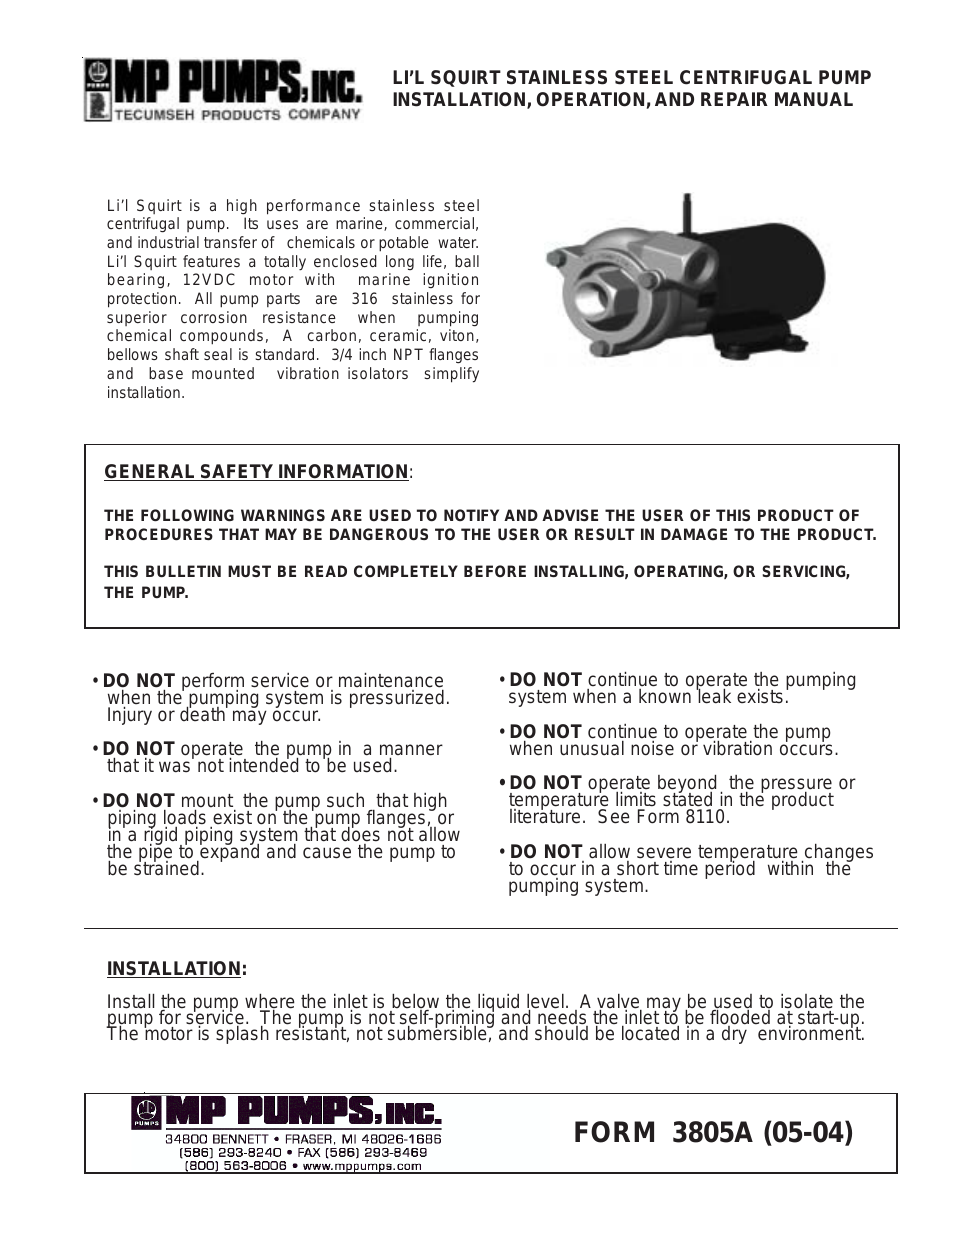 LI-L SQUIRT STAINLESS STEEL CENTRIFUGAL PUMP INSTRUCTION